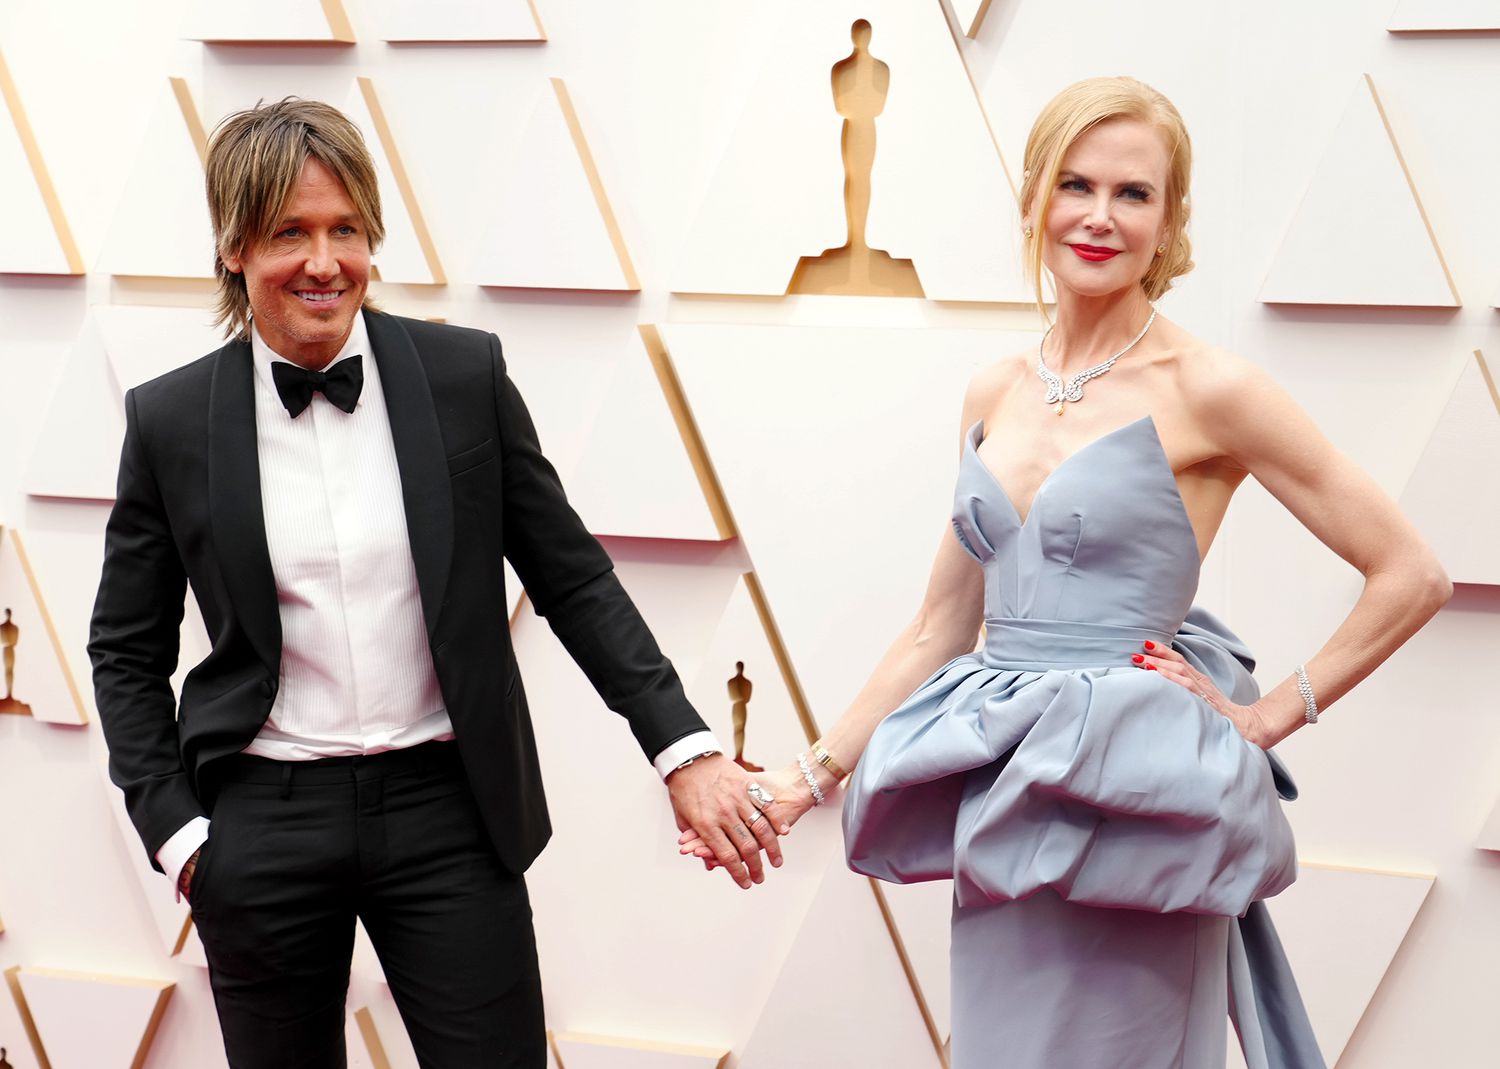 Nicole Kidman Says Keith Urban Flew in from Vegas to Support Her at Oscars: ‘Whatever It Takes’